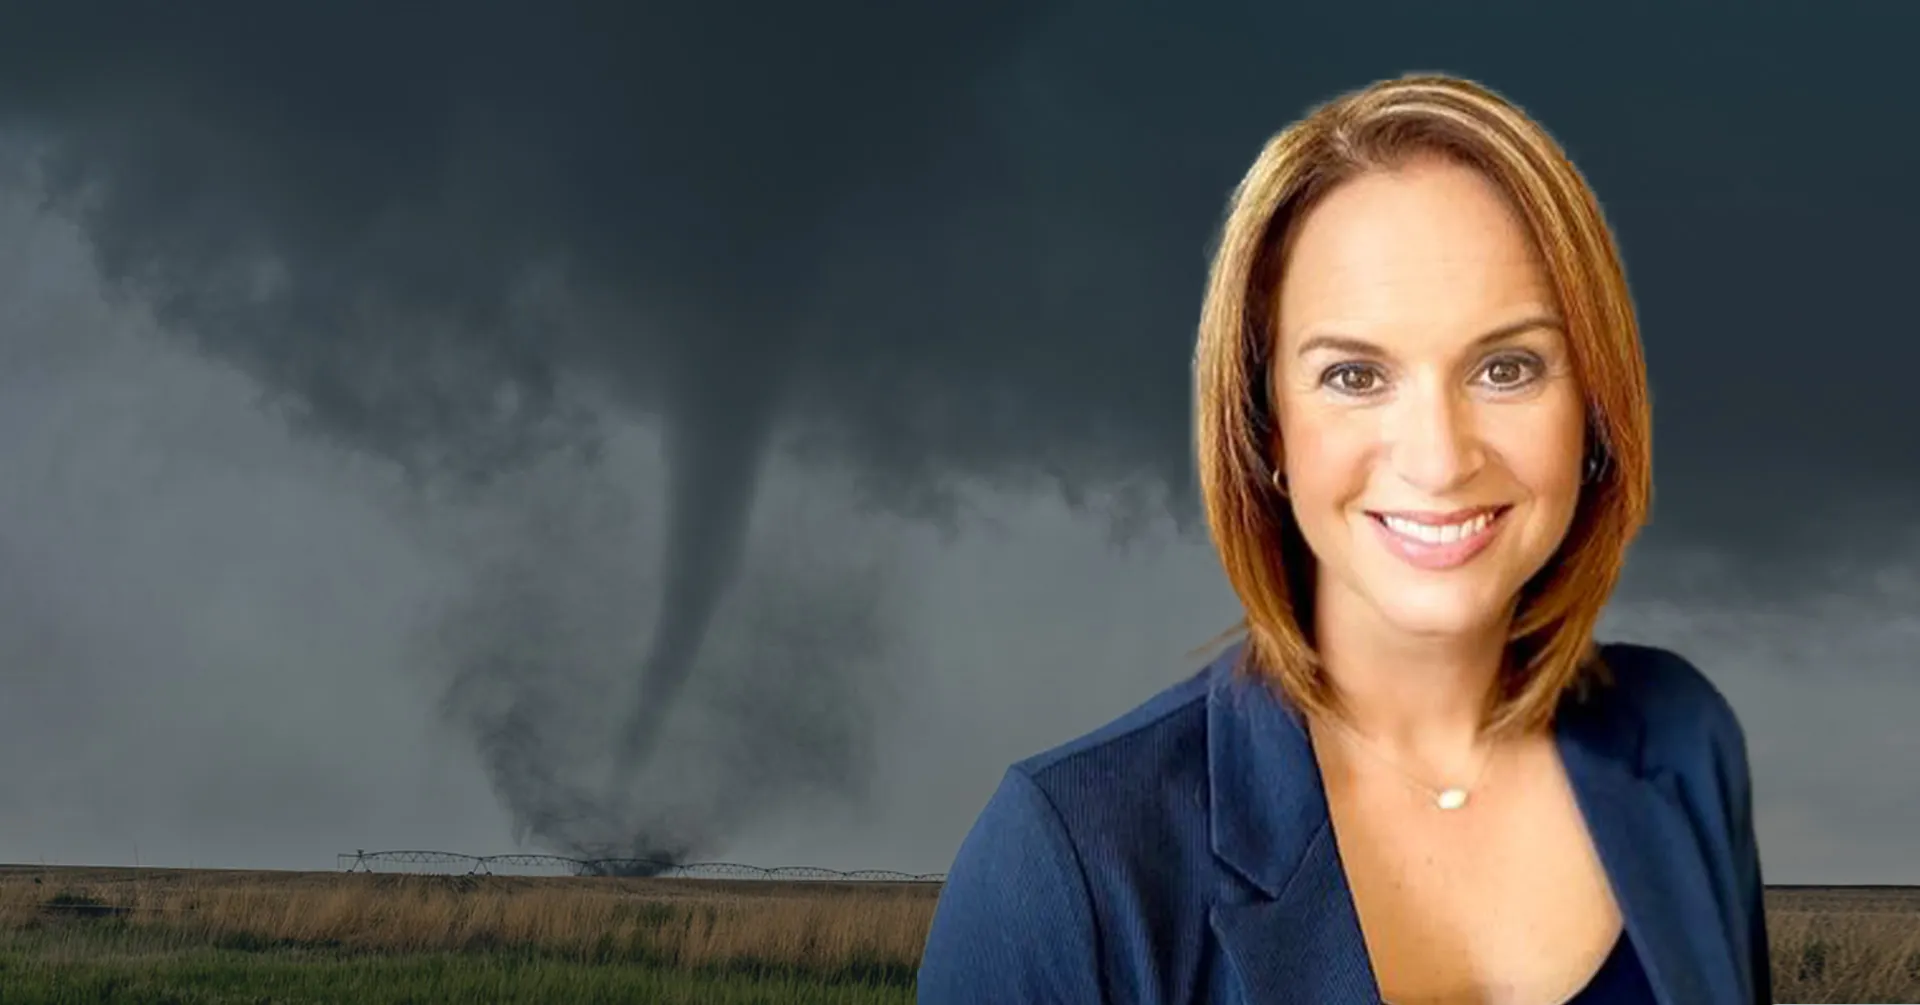 Tornado Preparedness Tips From the National Weather Service